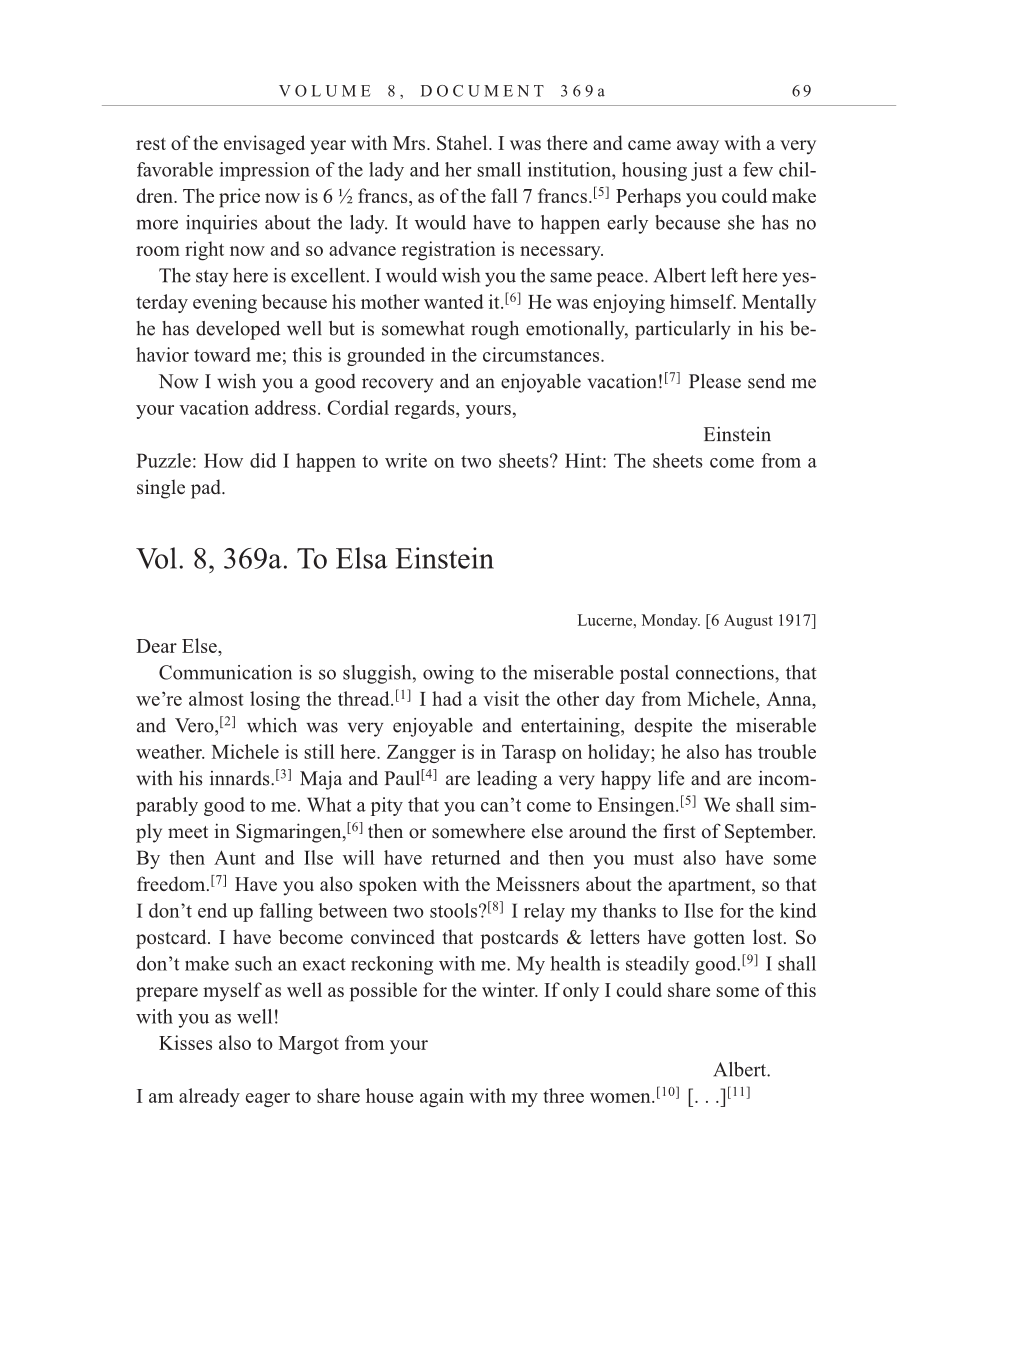 Volume 10: The Berlin Years: Correspondence, May-December 1920, and Supplementary Correspondence, 1909-1920 (English translation supplement) page 69